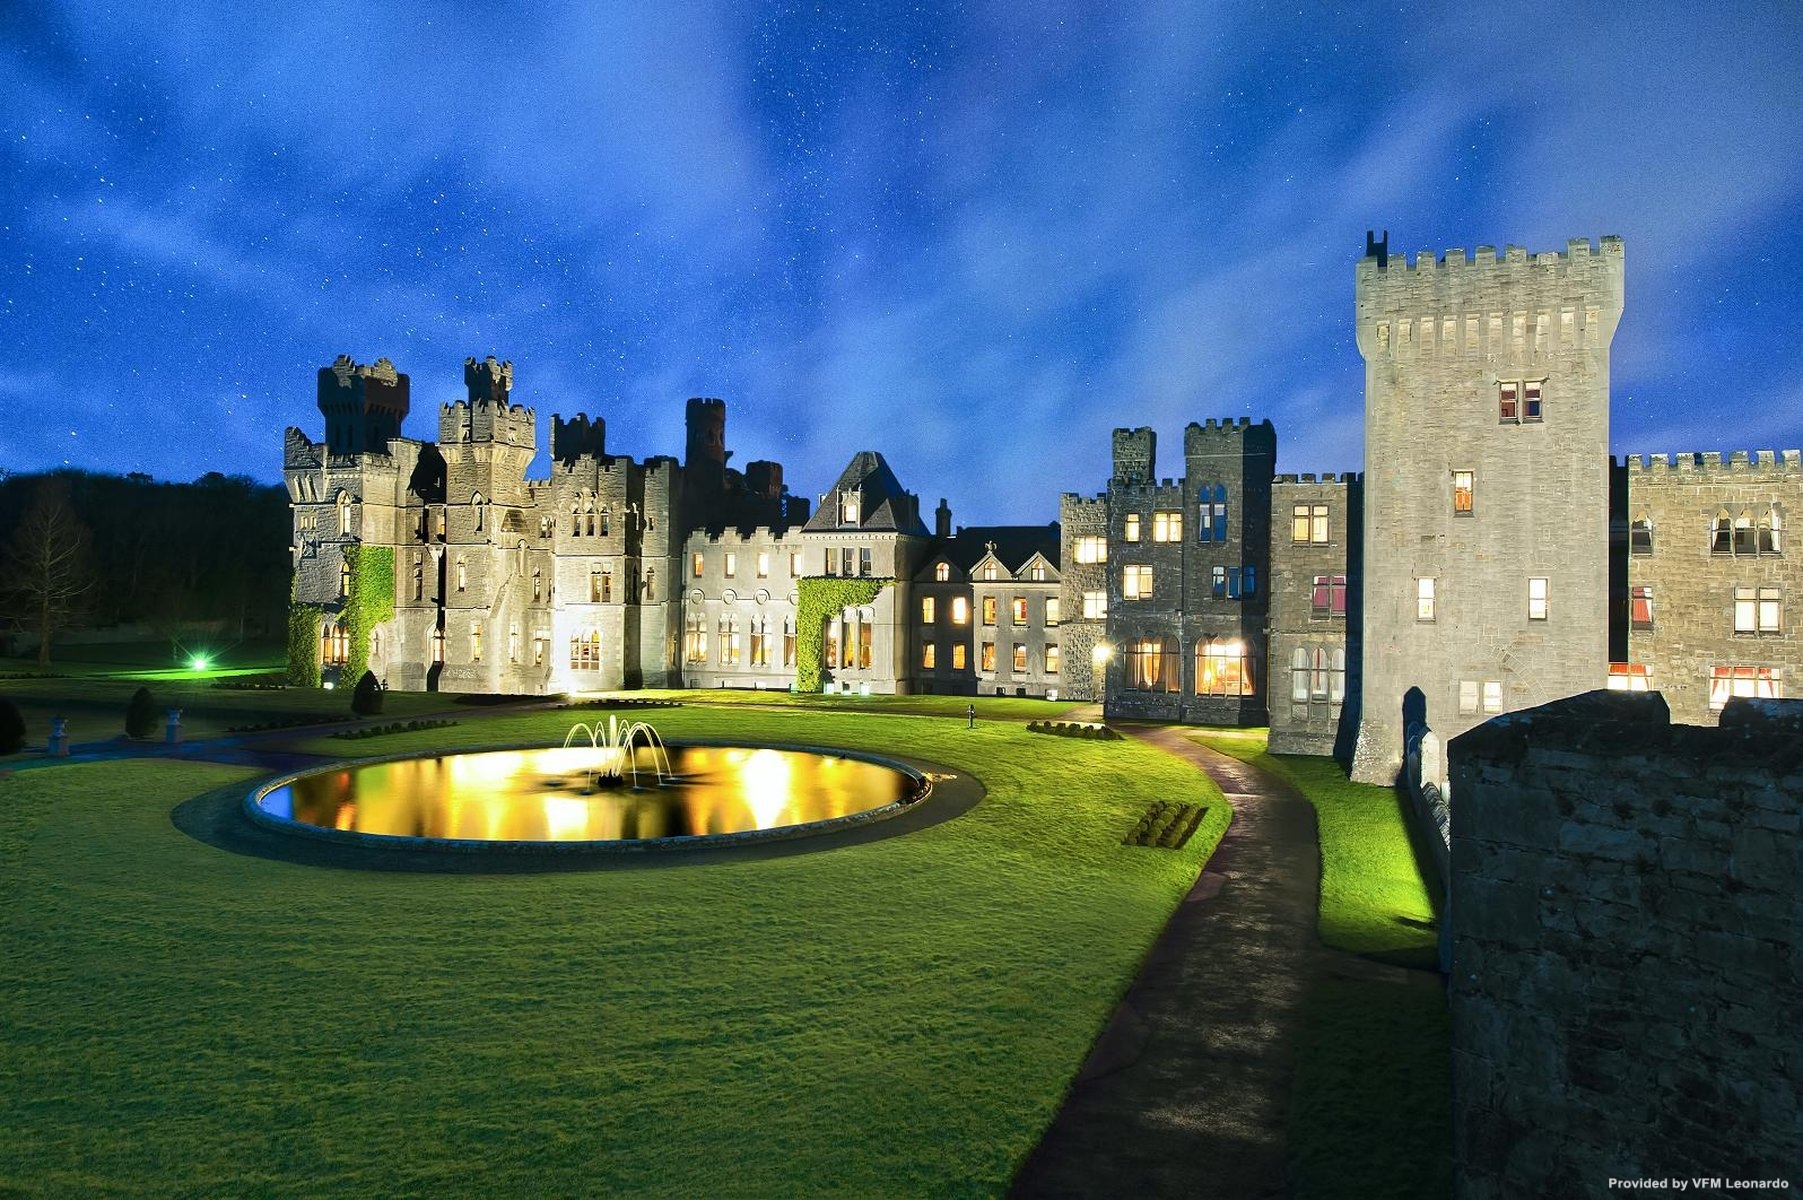 Hotel Ashford Castle - Mayo - Great prices at HOTEL INFO